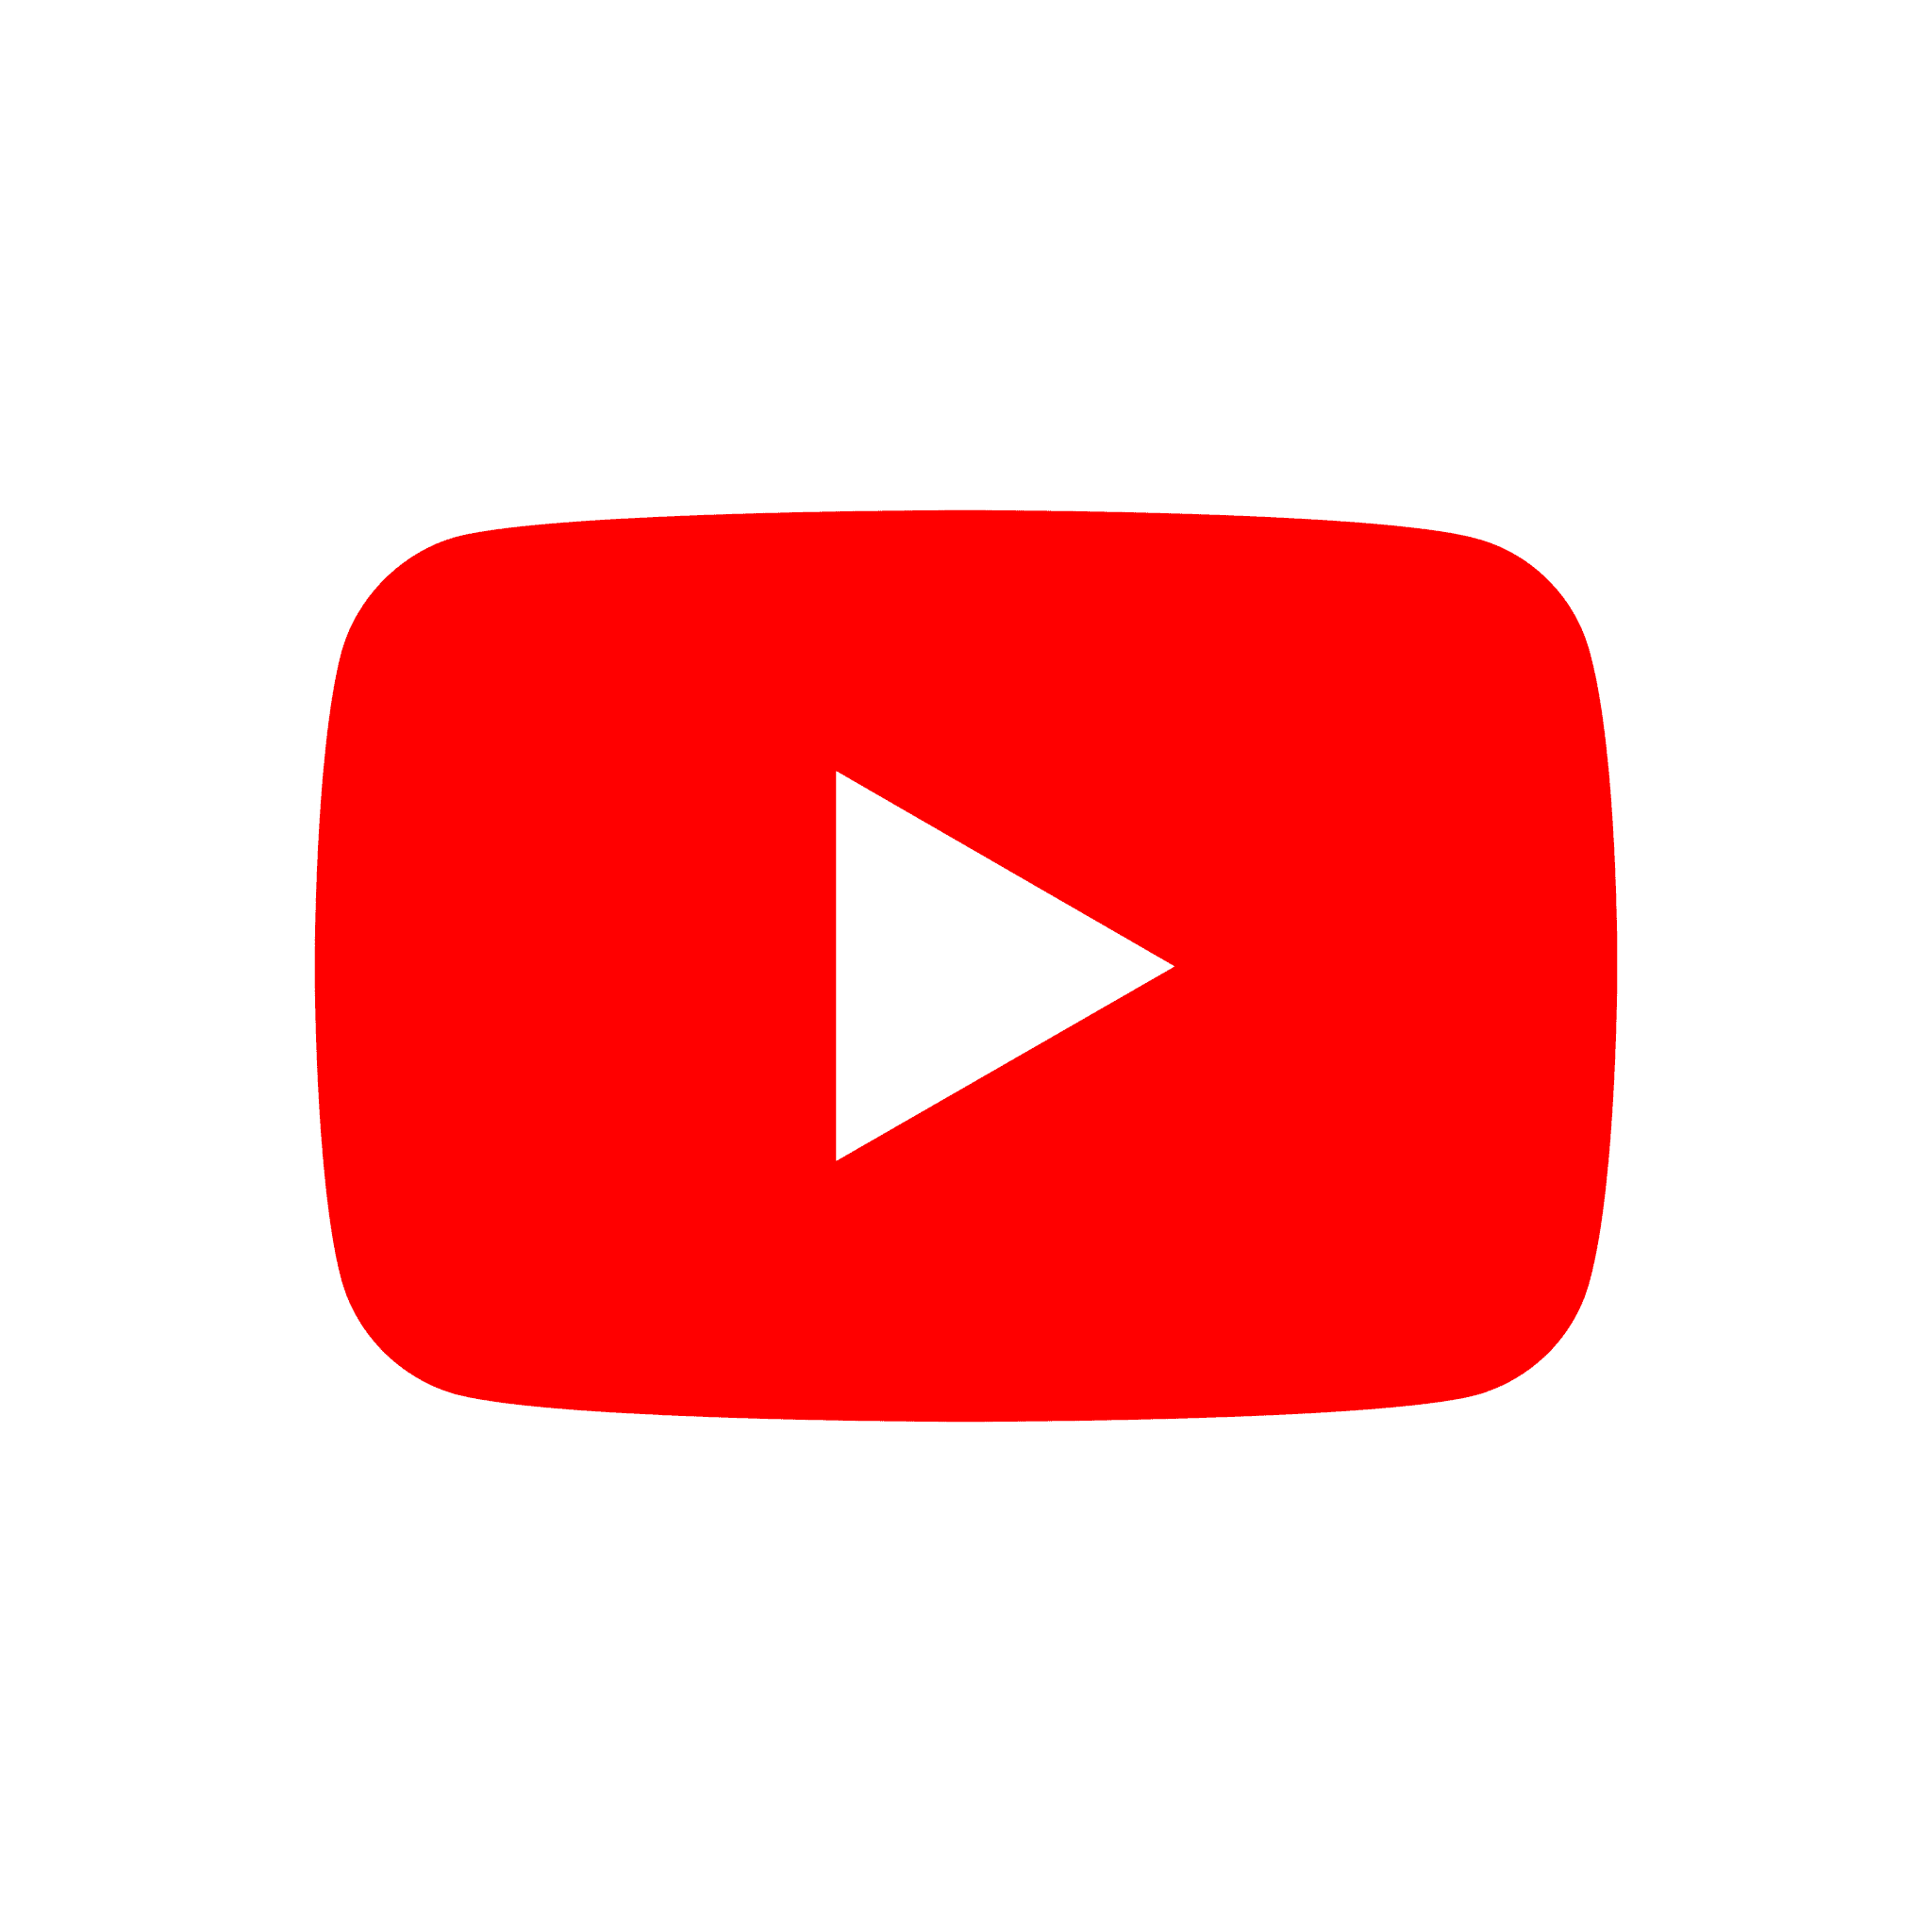 Youtube logo - White triangle pointing right on a red rounded rectangle